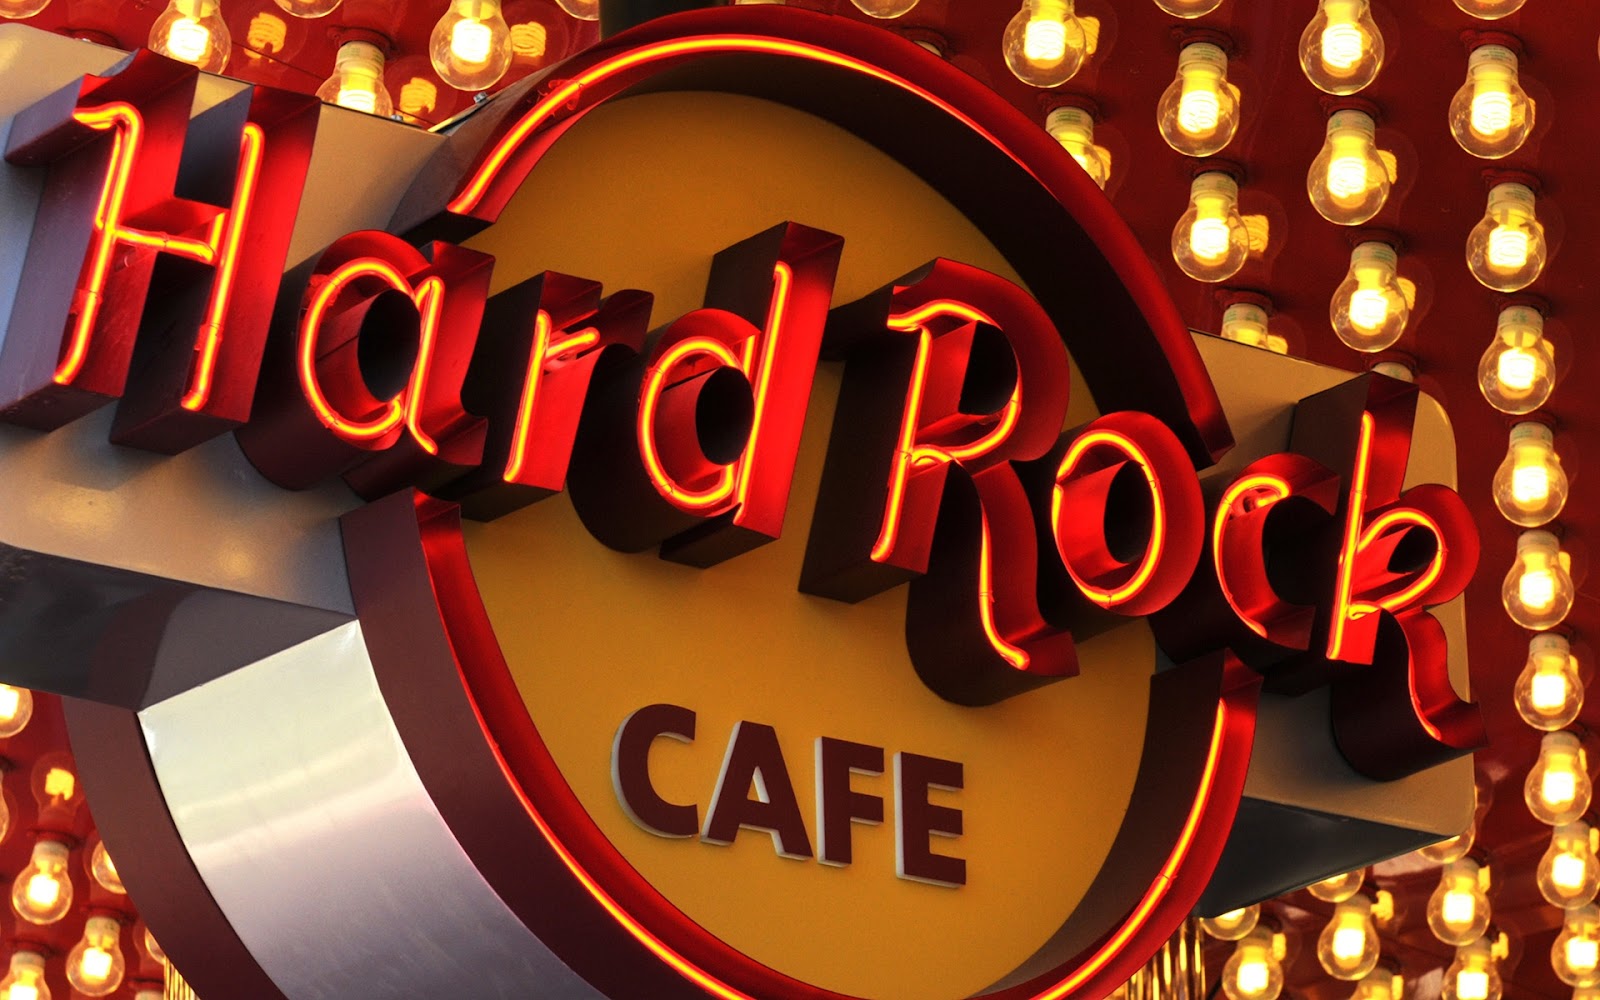 Get ready for Hard Rock Cafe Puteri Harbour this December!